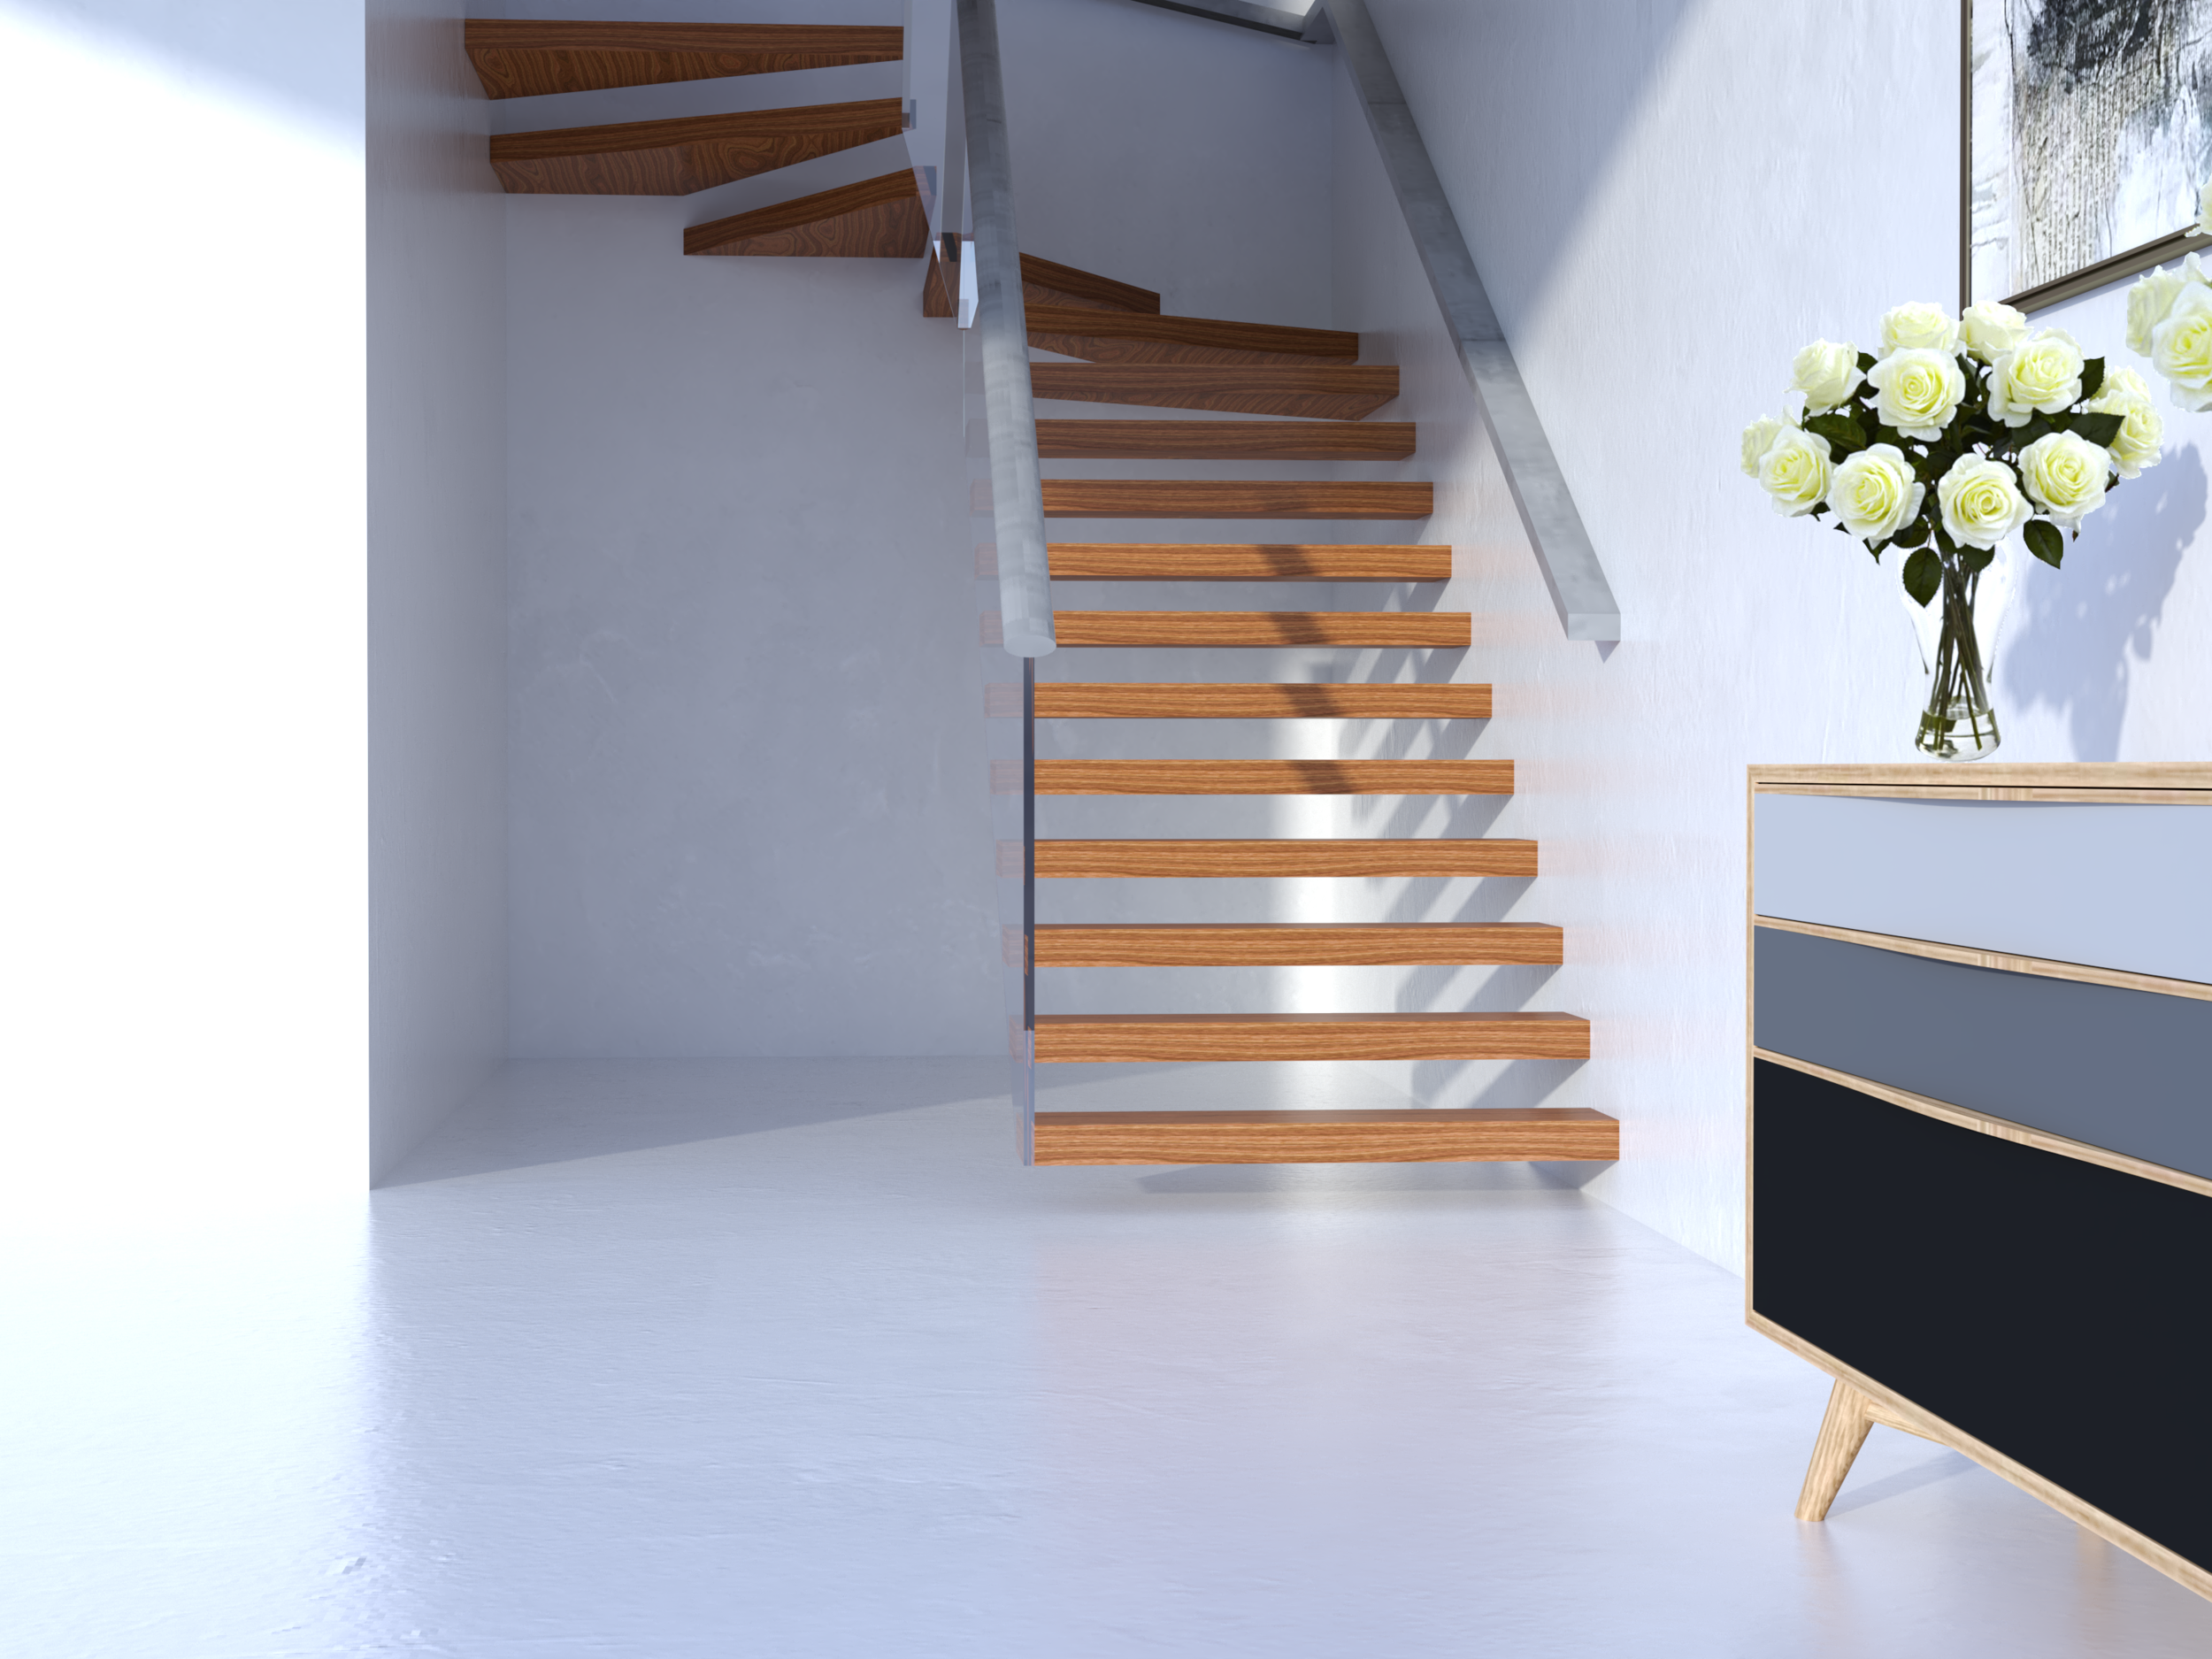 Staircase 2 - daylight (furniture).png